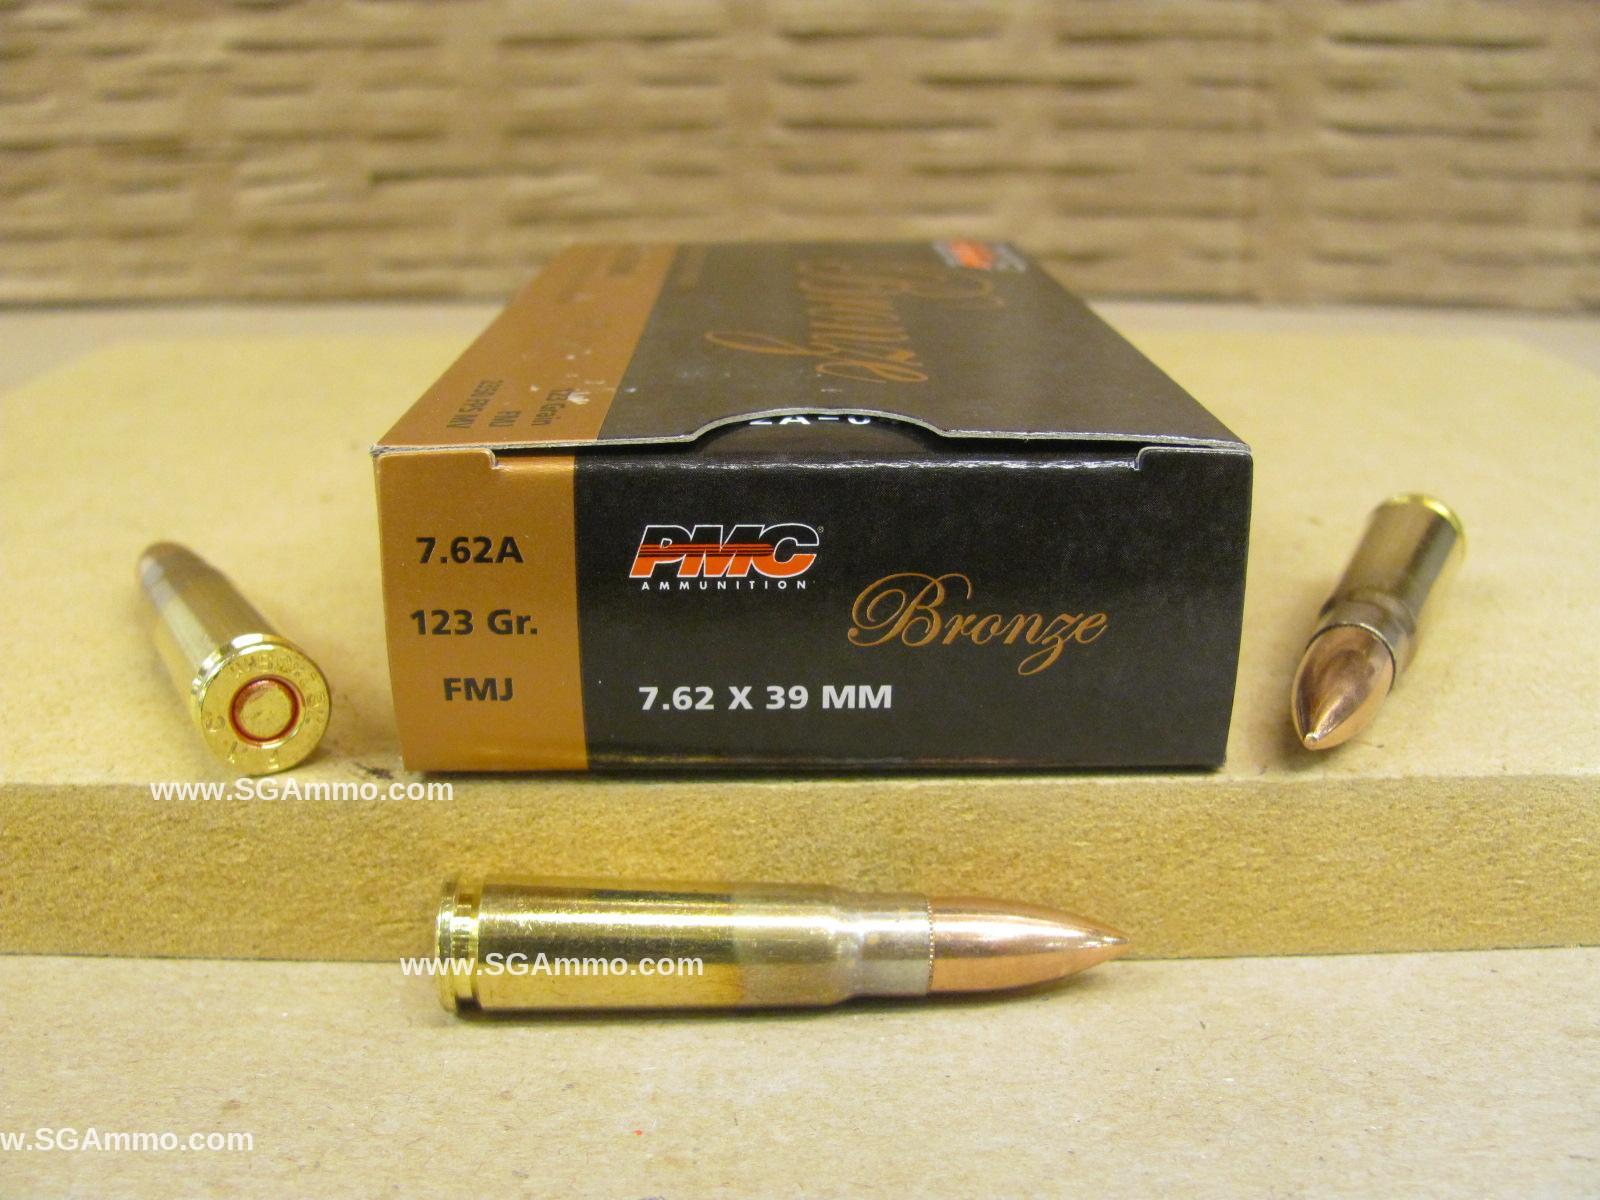 500 Round Case - 7.62x39 123 Grain FMJ Non-Magnetic Projectile Brass Case PMC Ammo - 762A